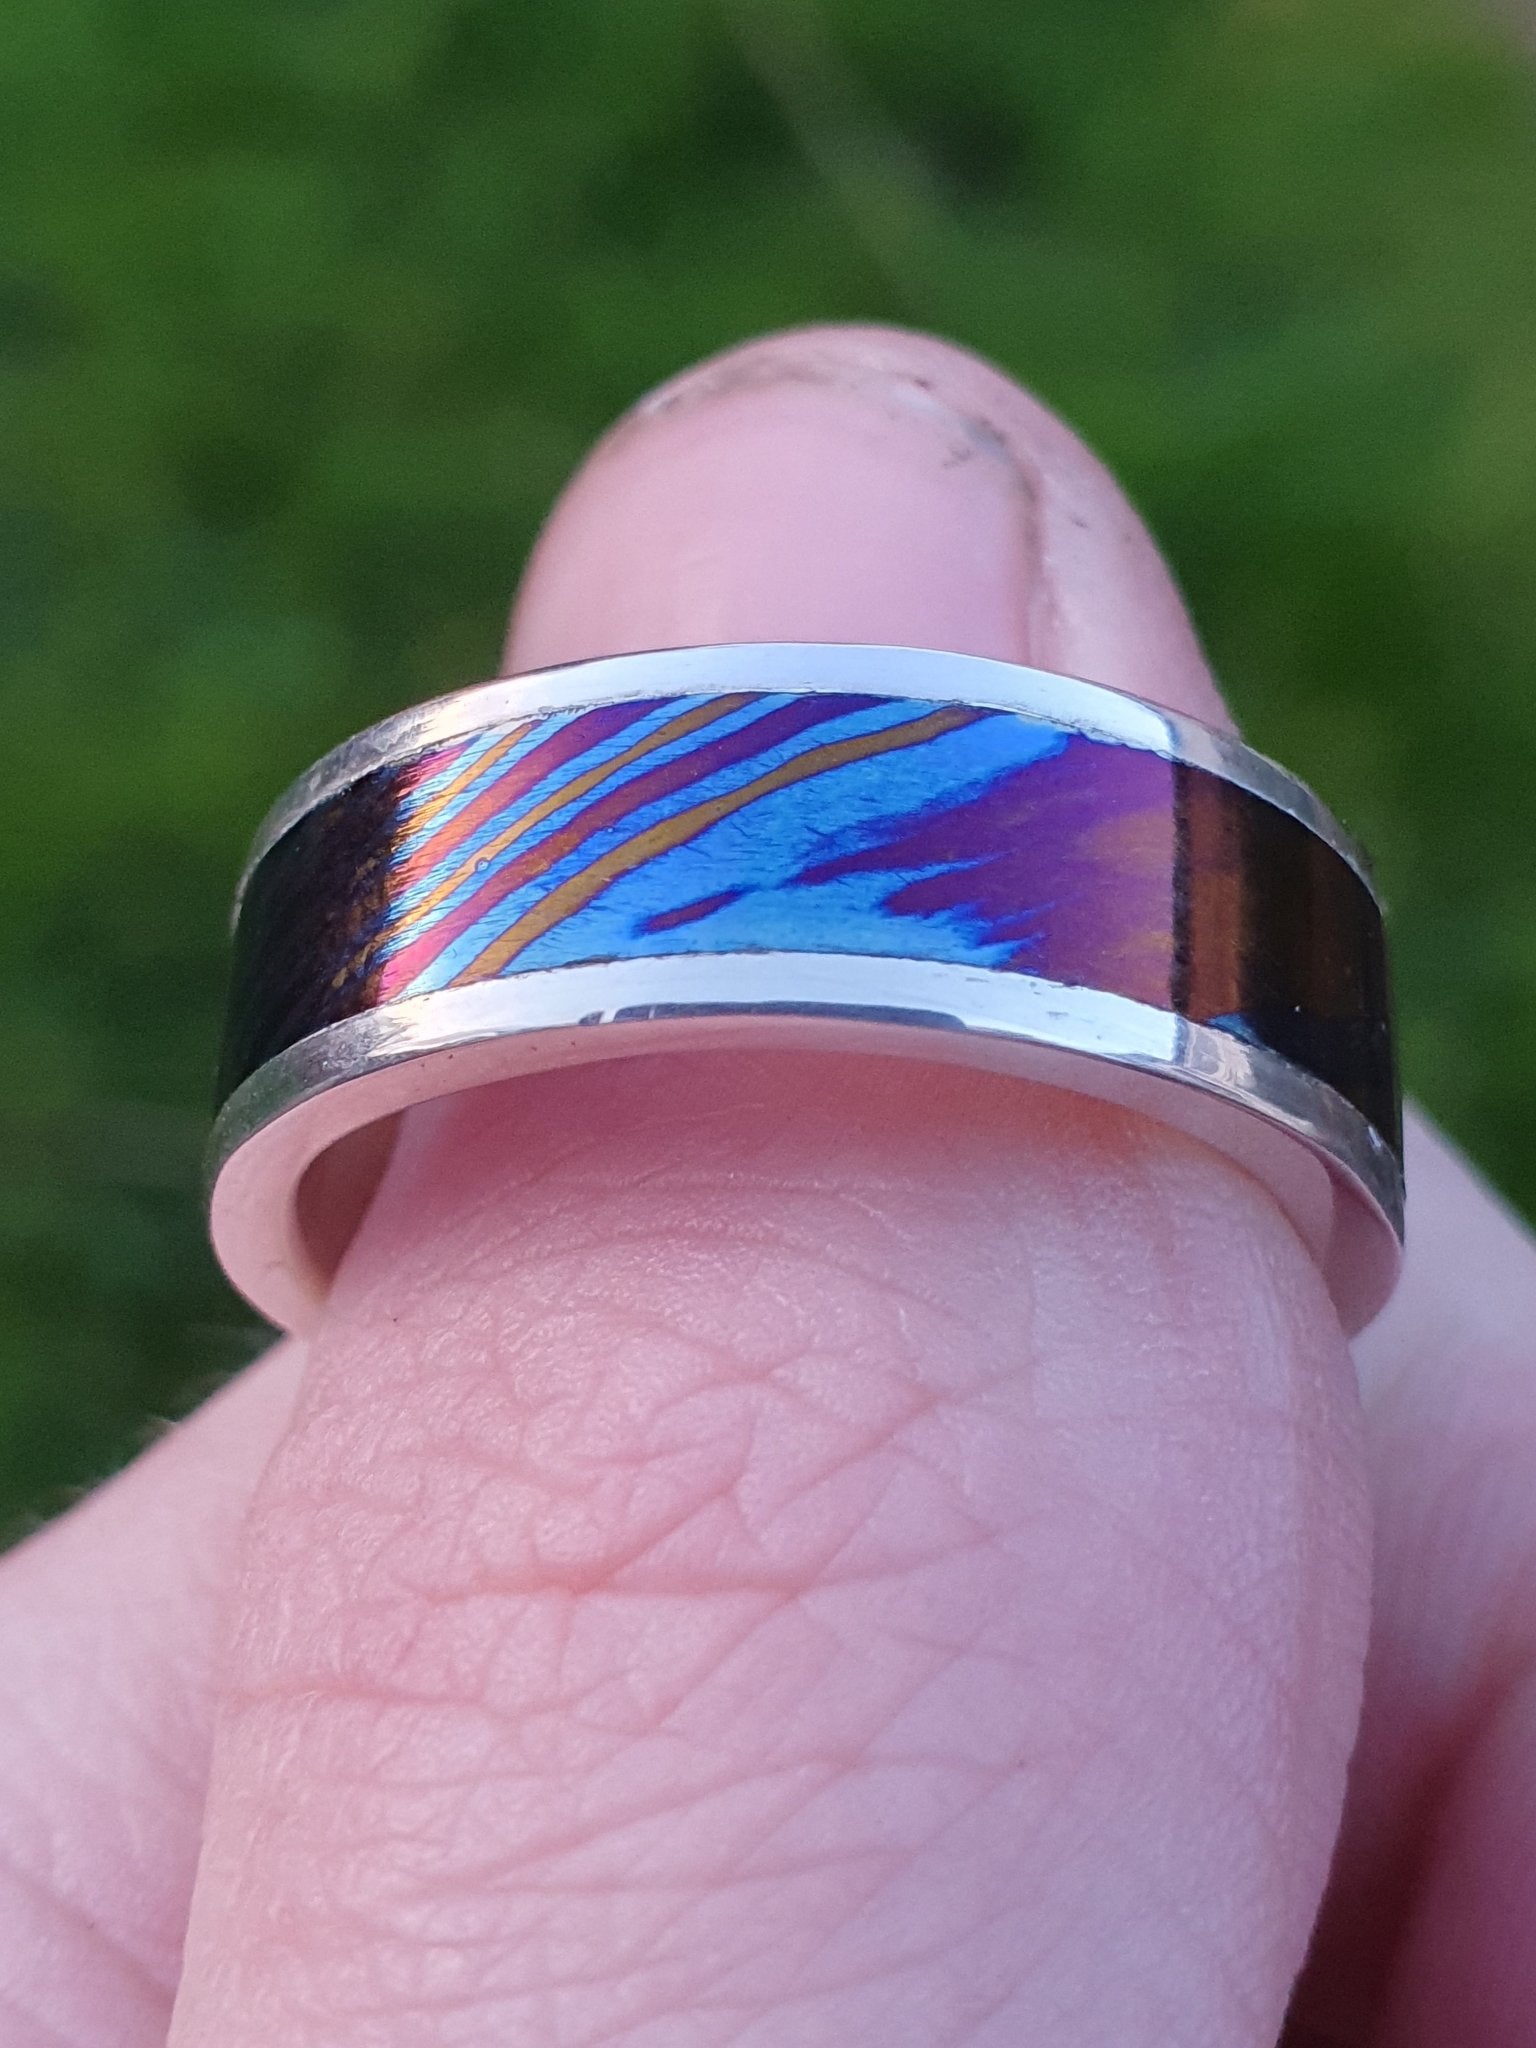 Timascus and Silver Ring - AlfiesHandCrafts